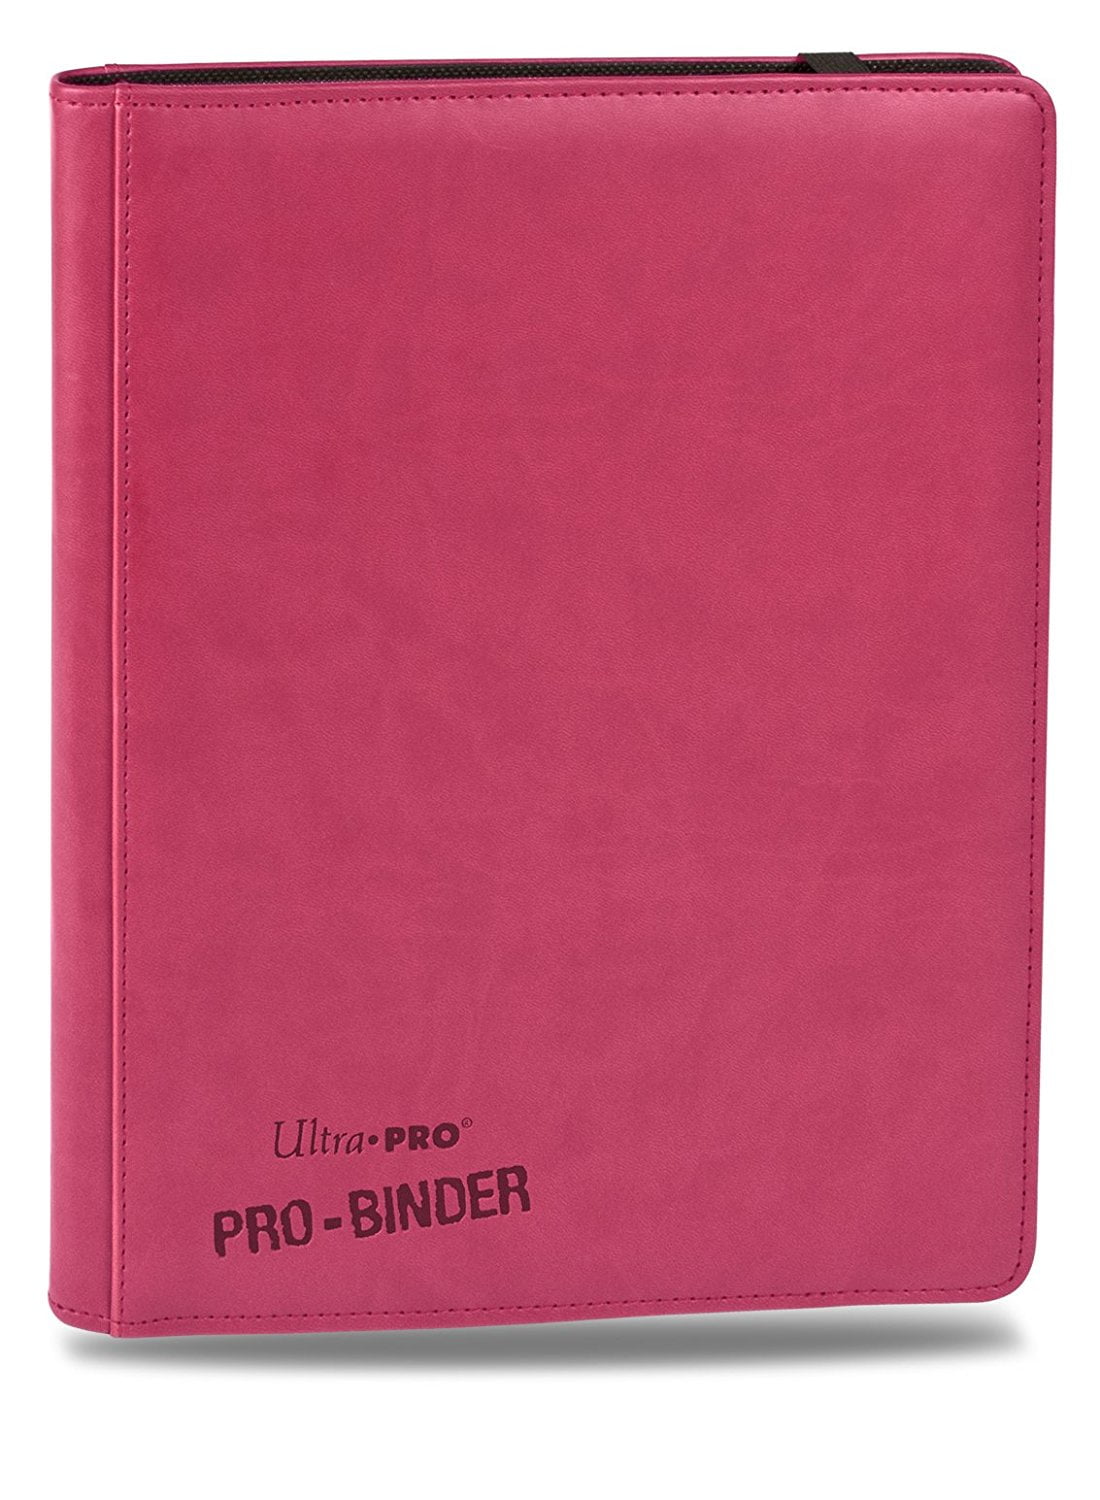 Ultra Pro Premium Pro-Binder Holds 360 Cards Pink New 